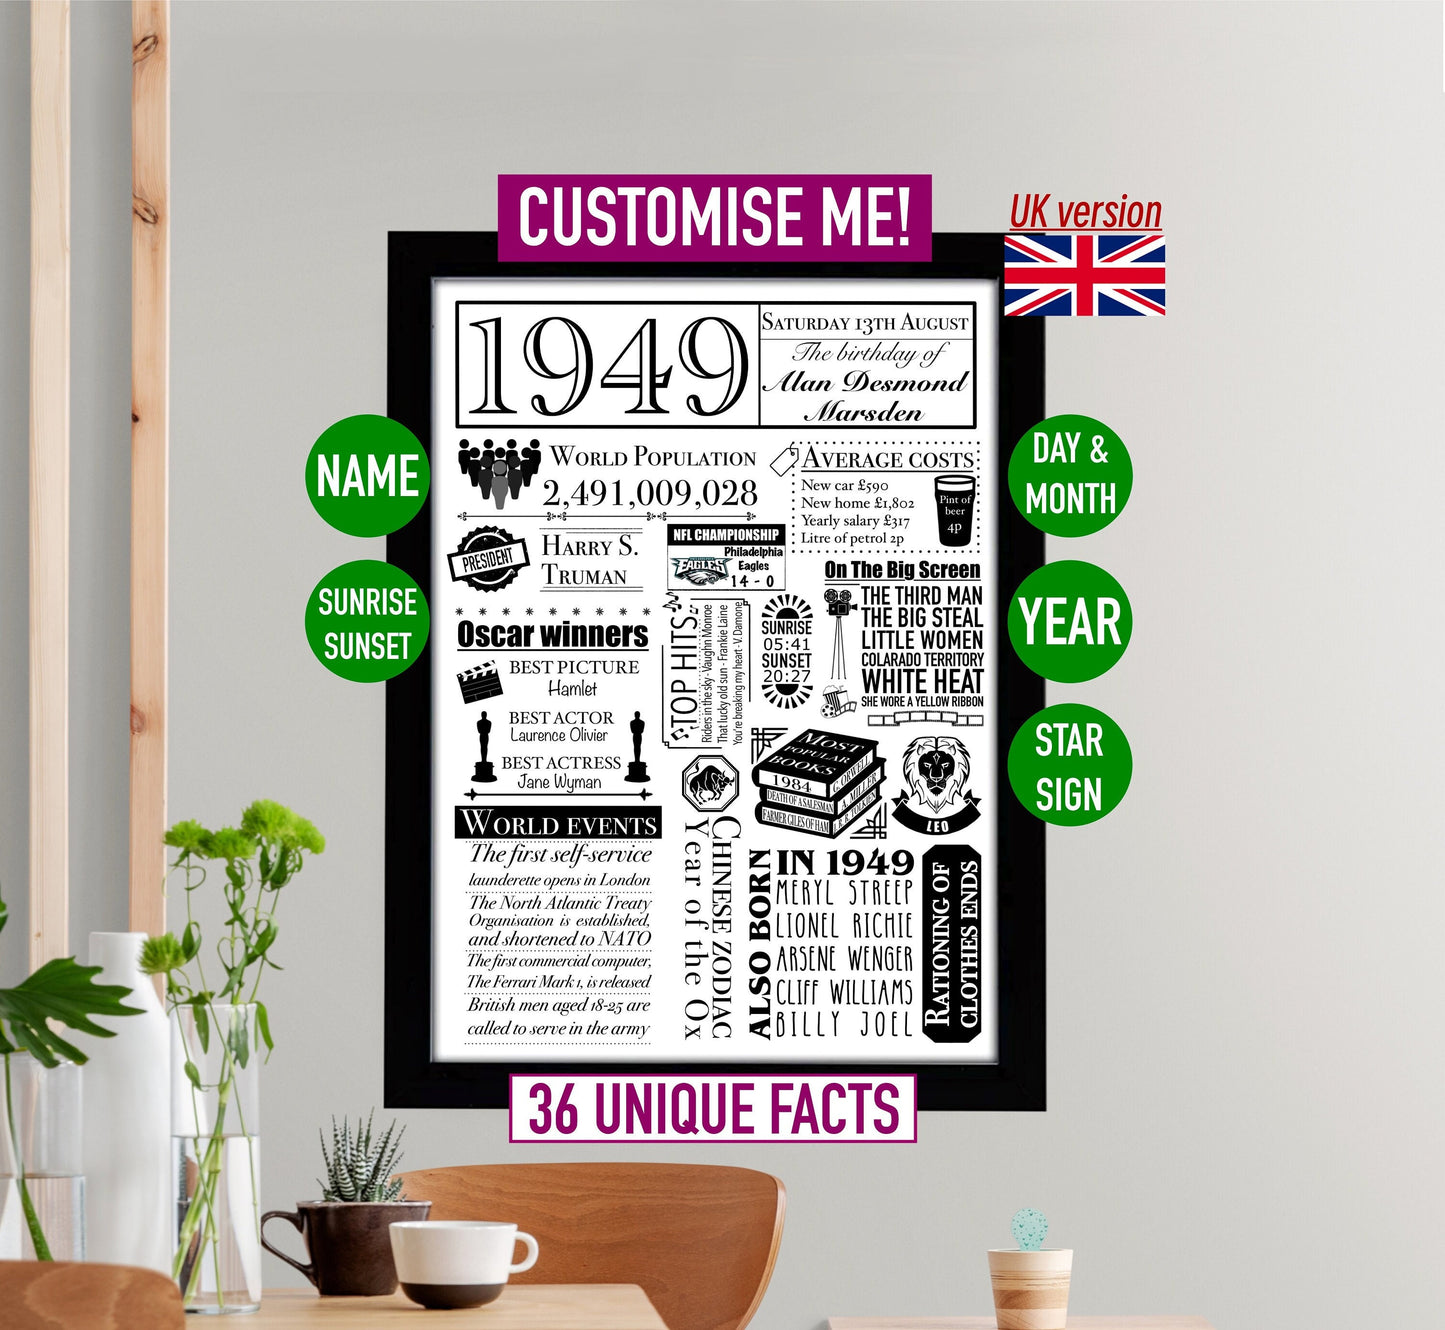 UK Birth year personalised present customisable birthday gift | what happened when | date of birth facts | Day you were born print